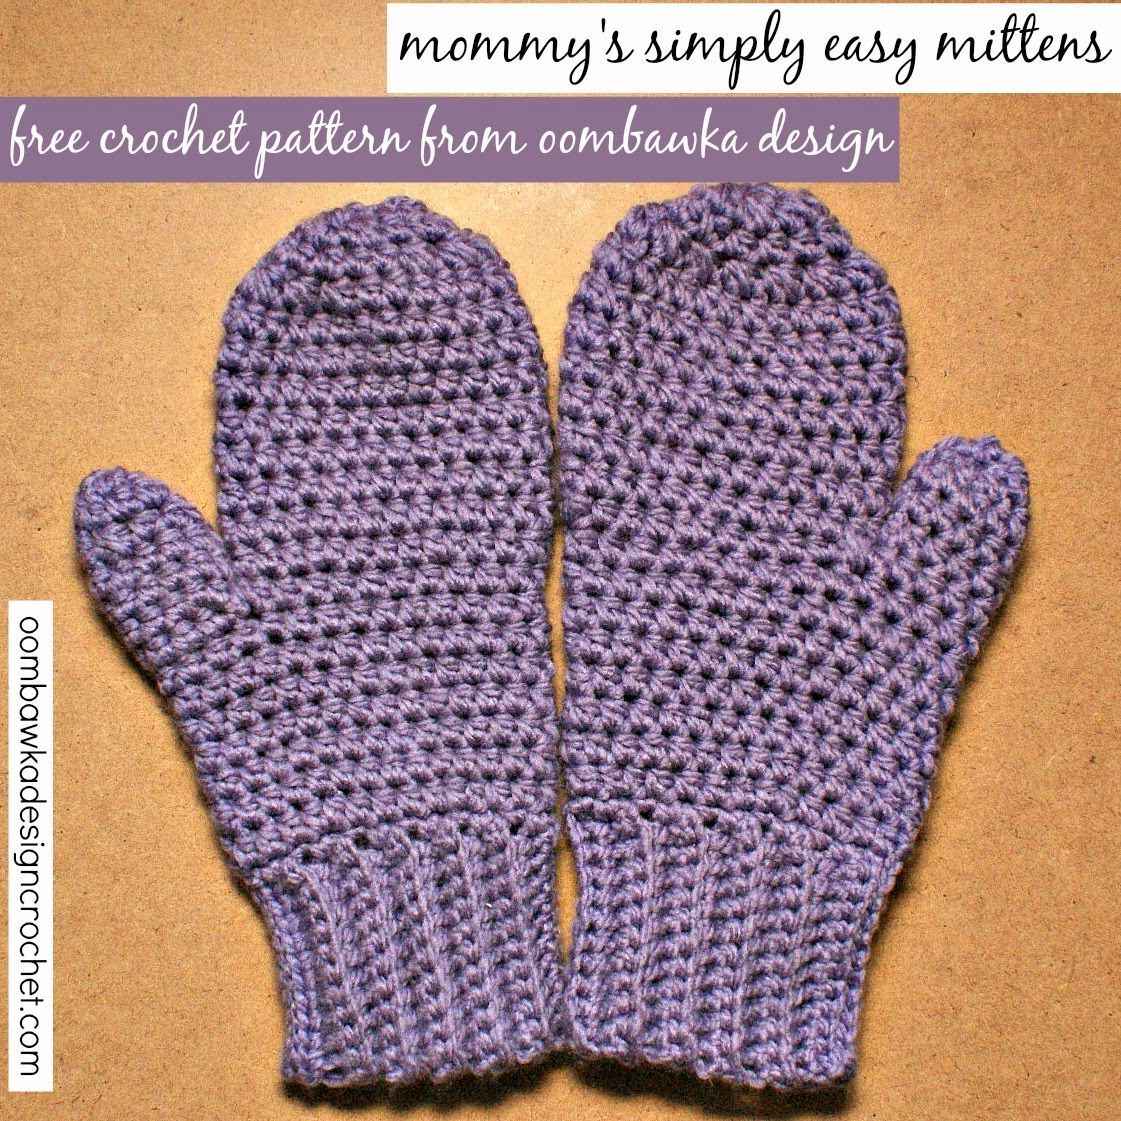 Mommys Simply Easy Mittens – FREE pattern from Oombawka Design..